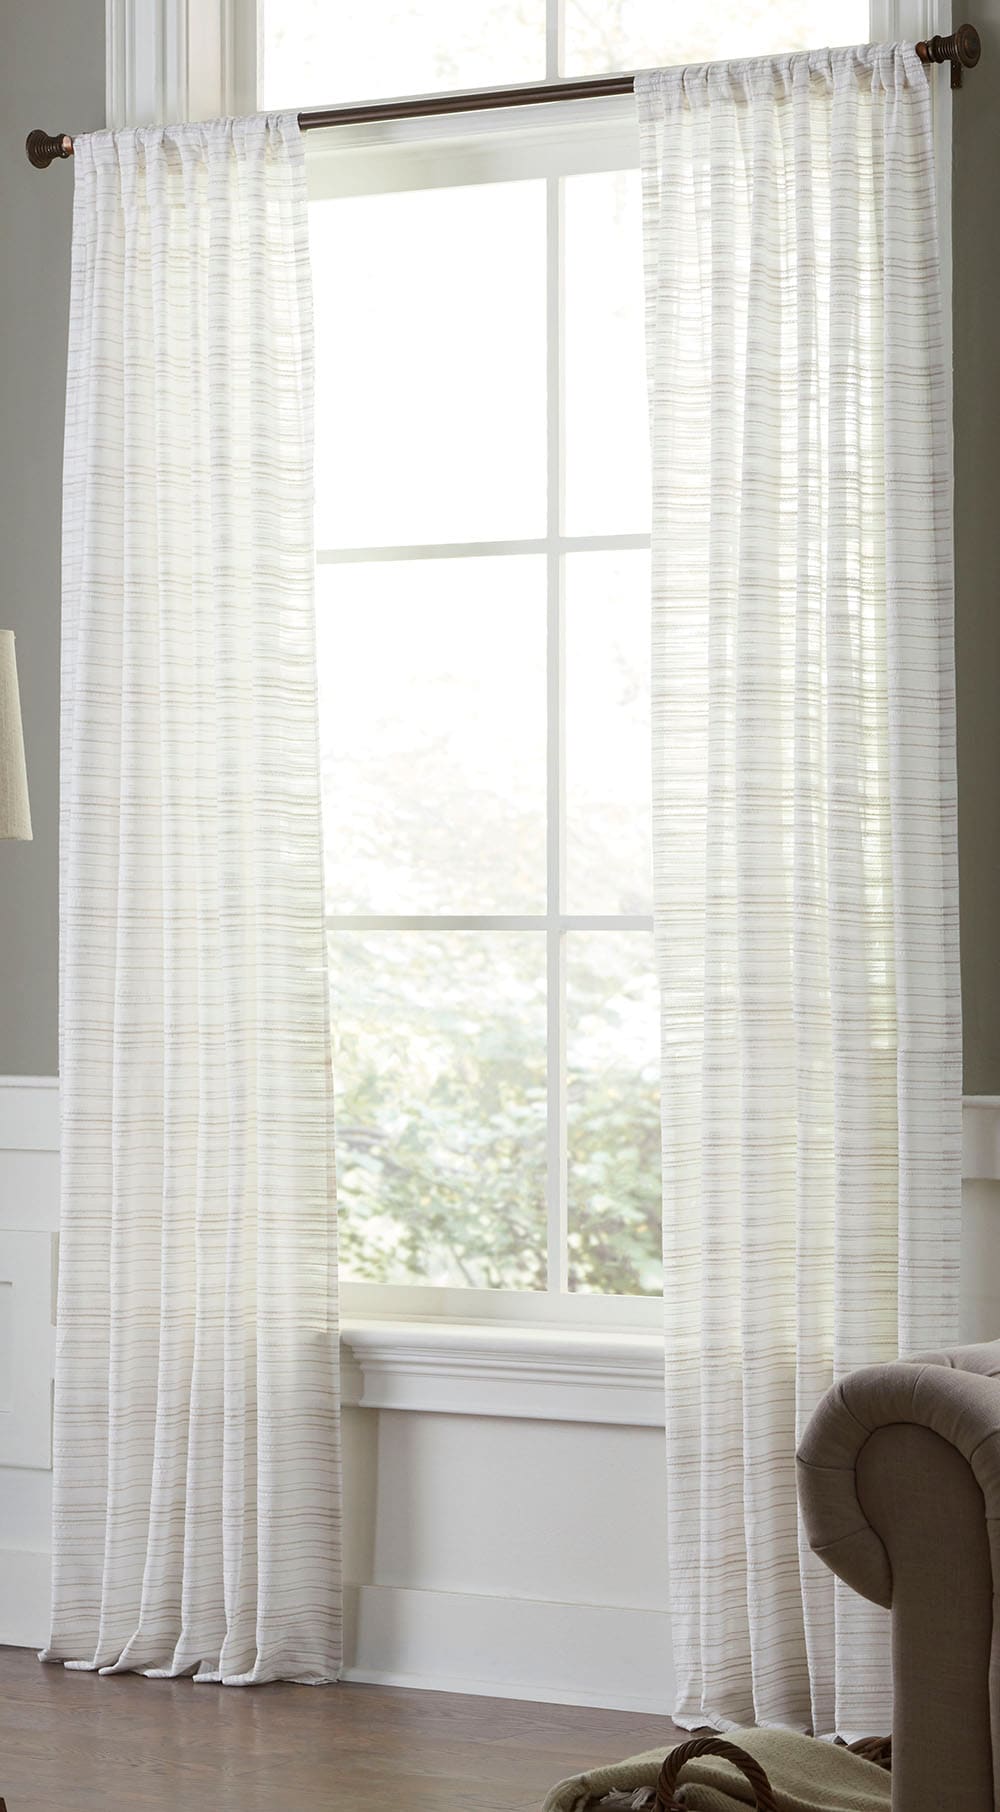 department + allen & Filtering Curtain the Pocket Single in Panel roth Drapes at Light Curtains Taupe 84-in Rod